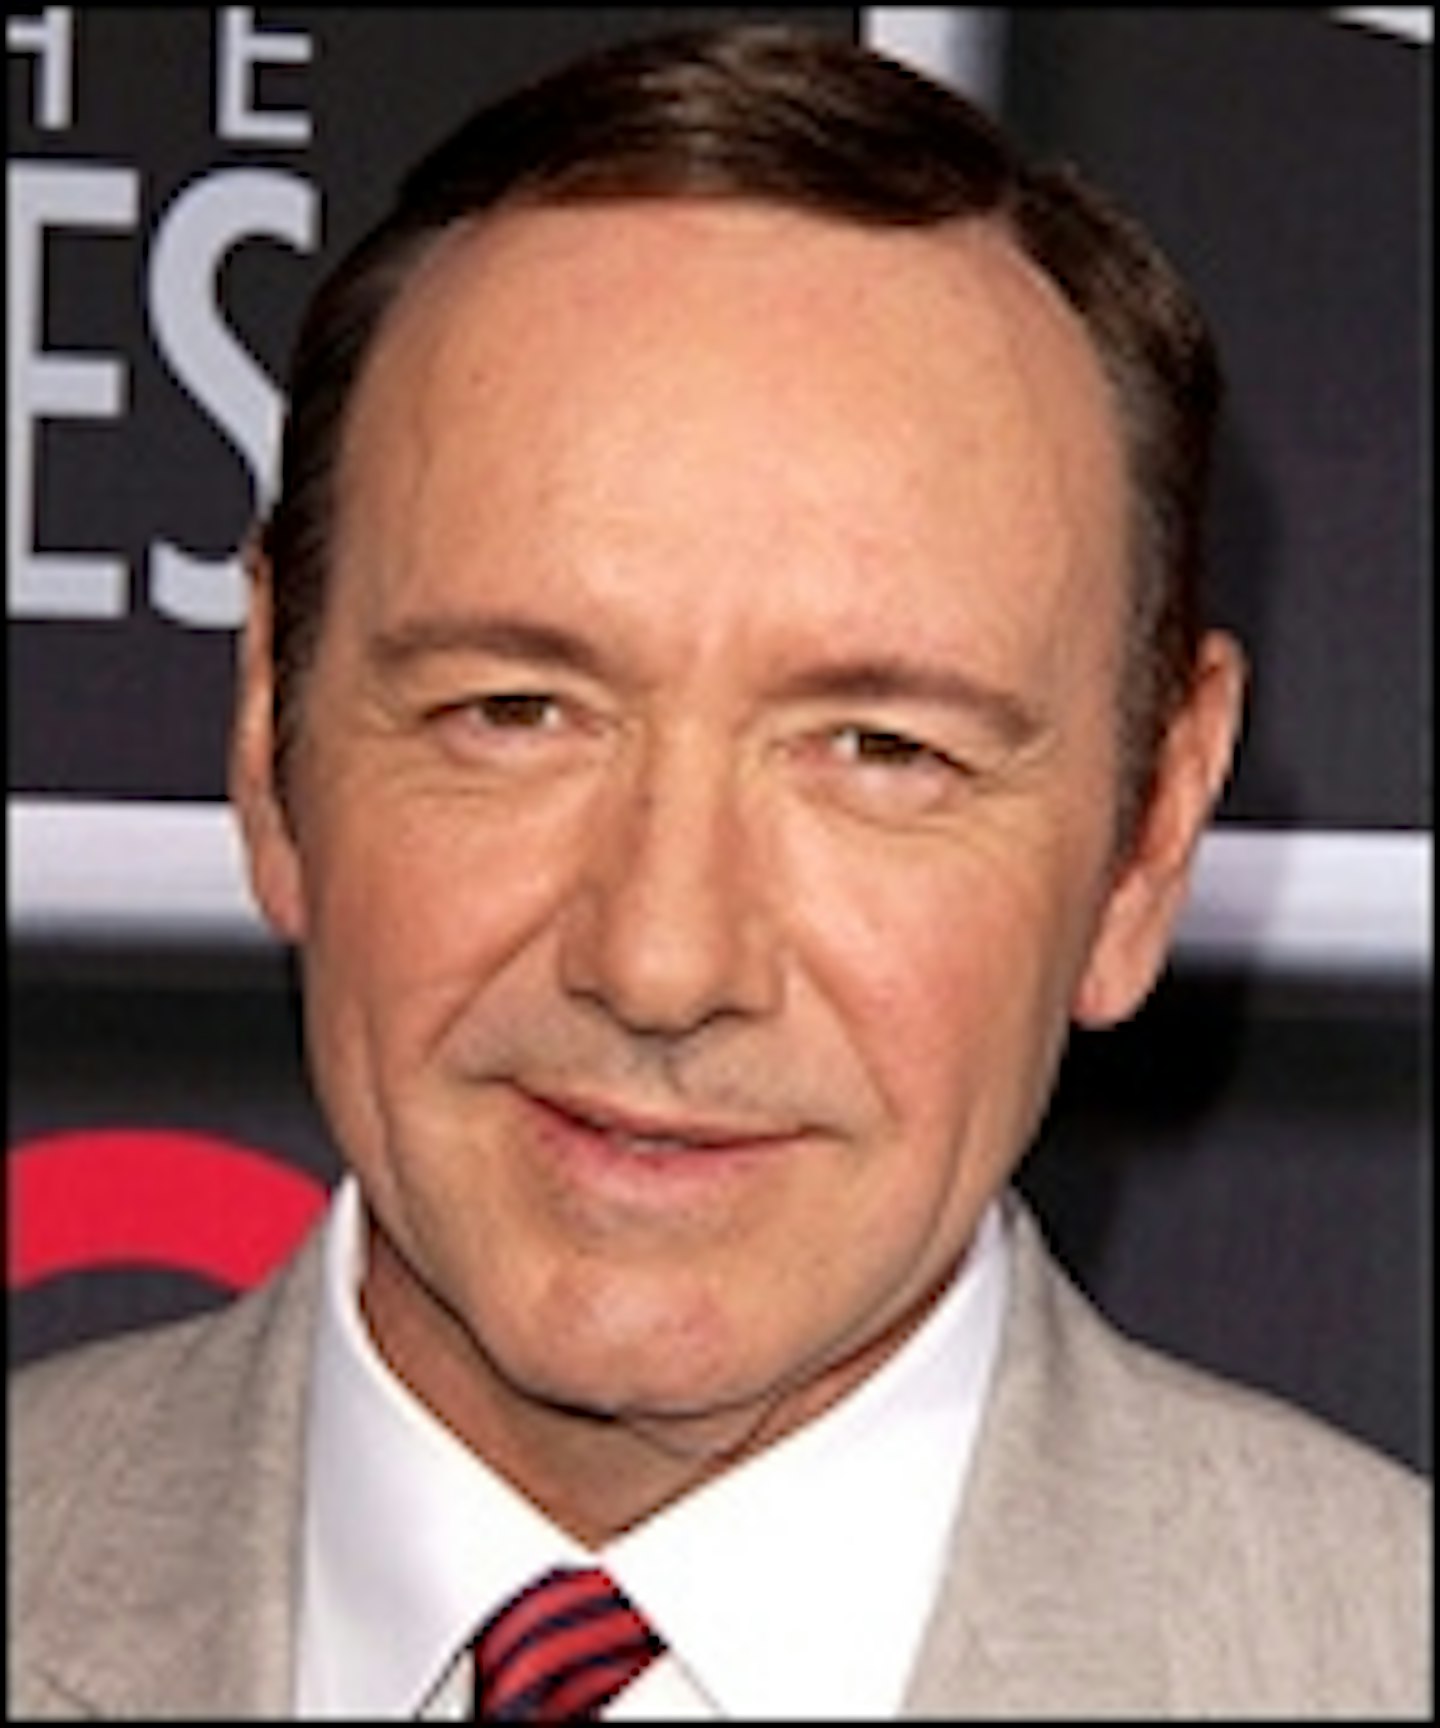 Official Call Of Duty: Advanced Warfare Trailer Stars Kevin Spacey